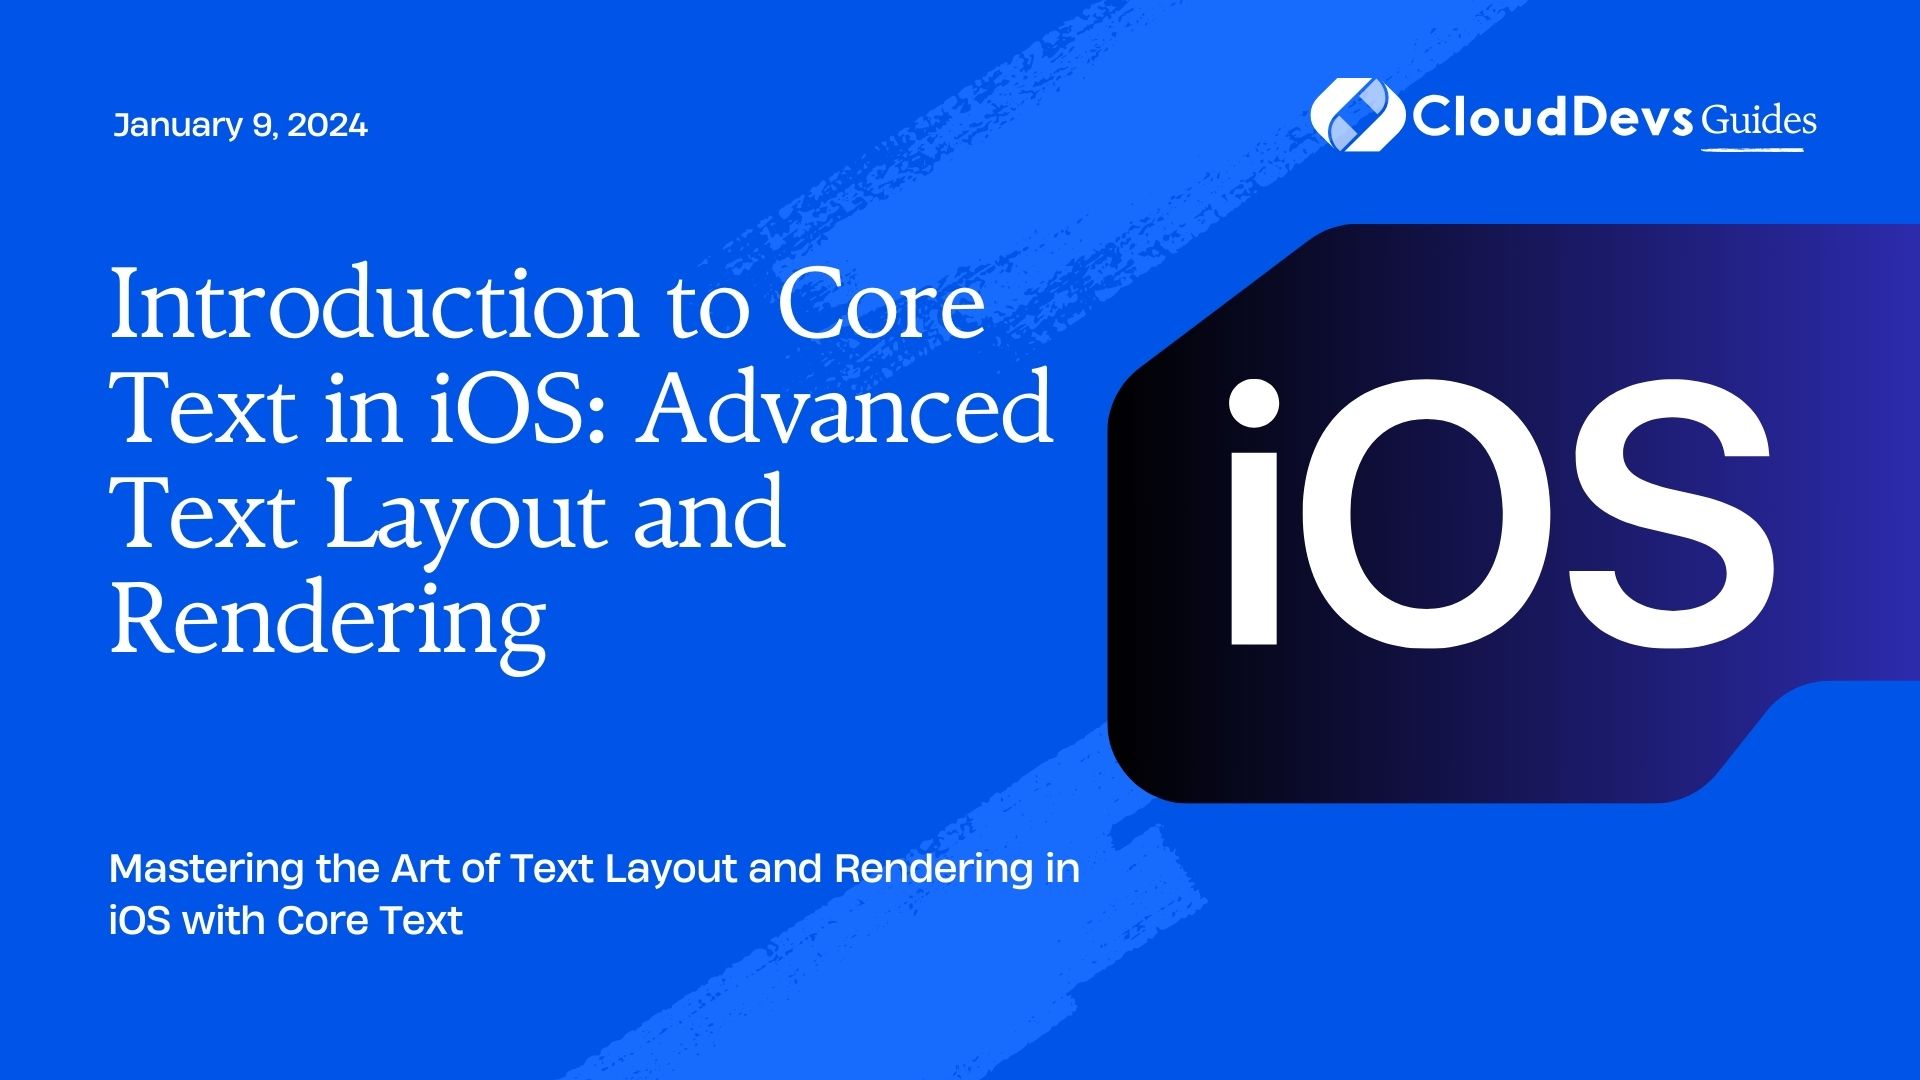 Introduction to Core Text in iOS: Advanced Text Layout and Rendering